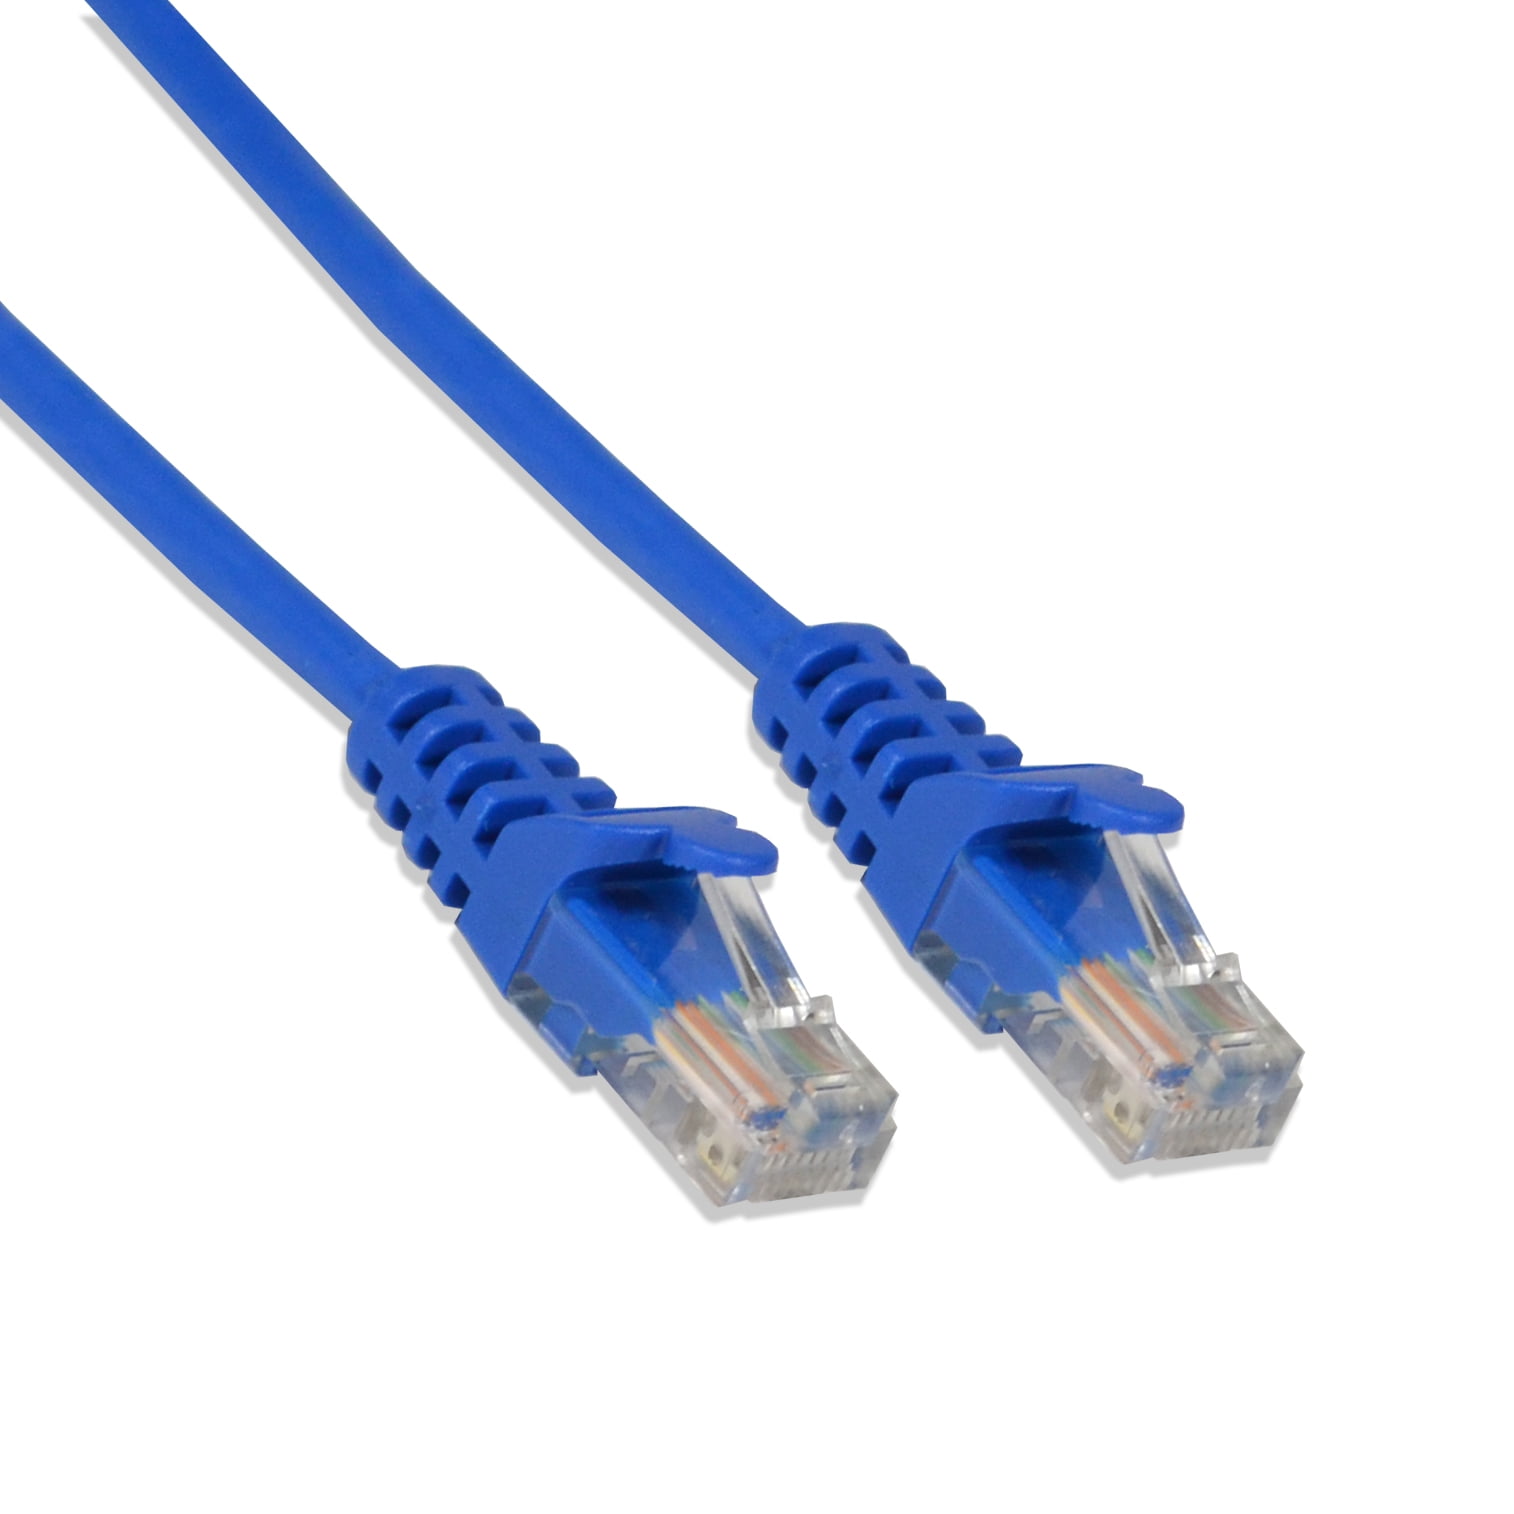 Blue 10 foot CAT5e Network Patch Cable 